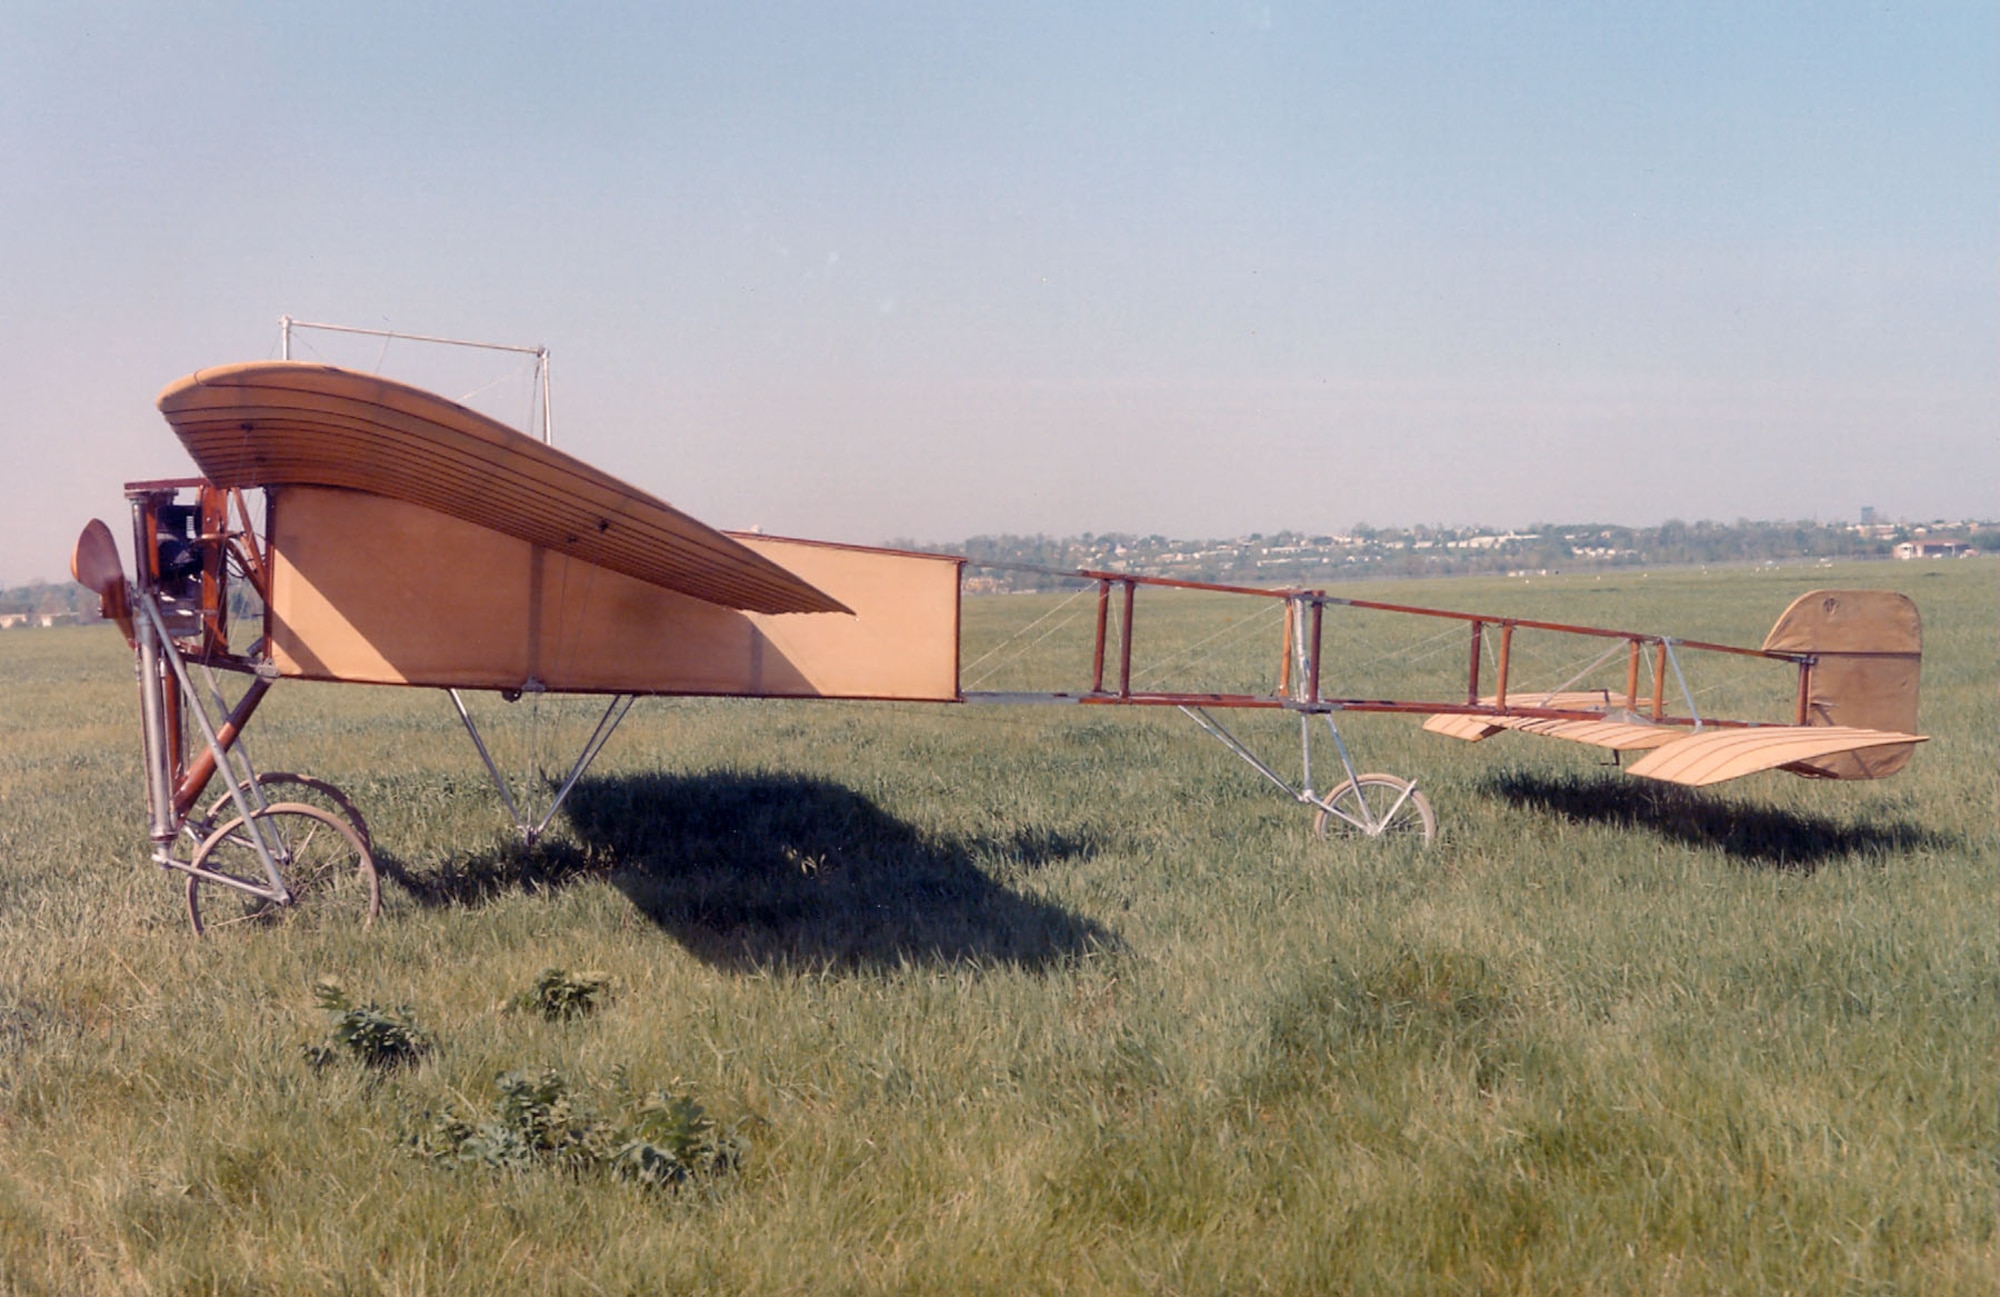 DAYTON, Ohio -- Bleriot Monoplane at the National Museum of the United States Air Force. (U.S. Air Force photo)